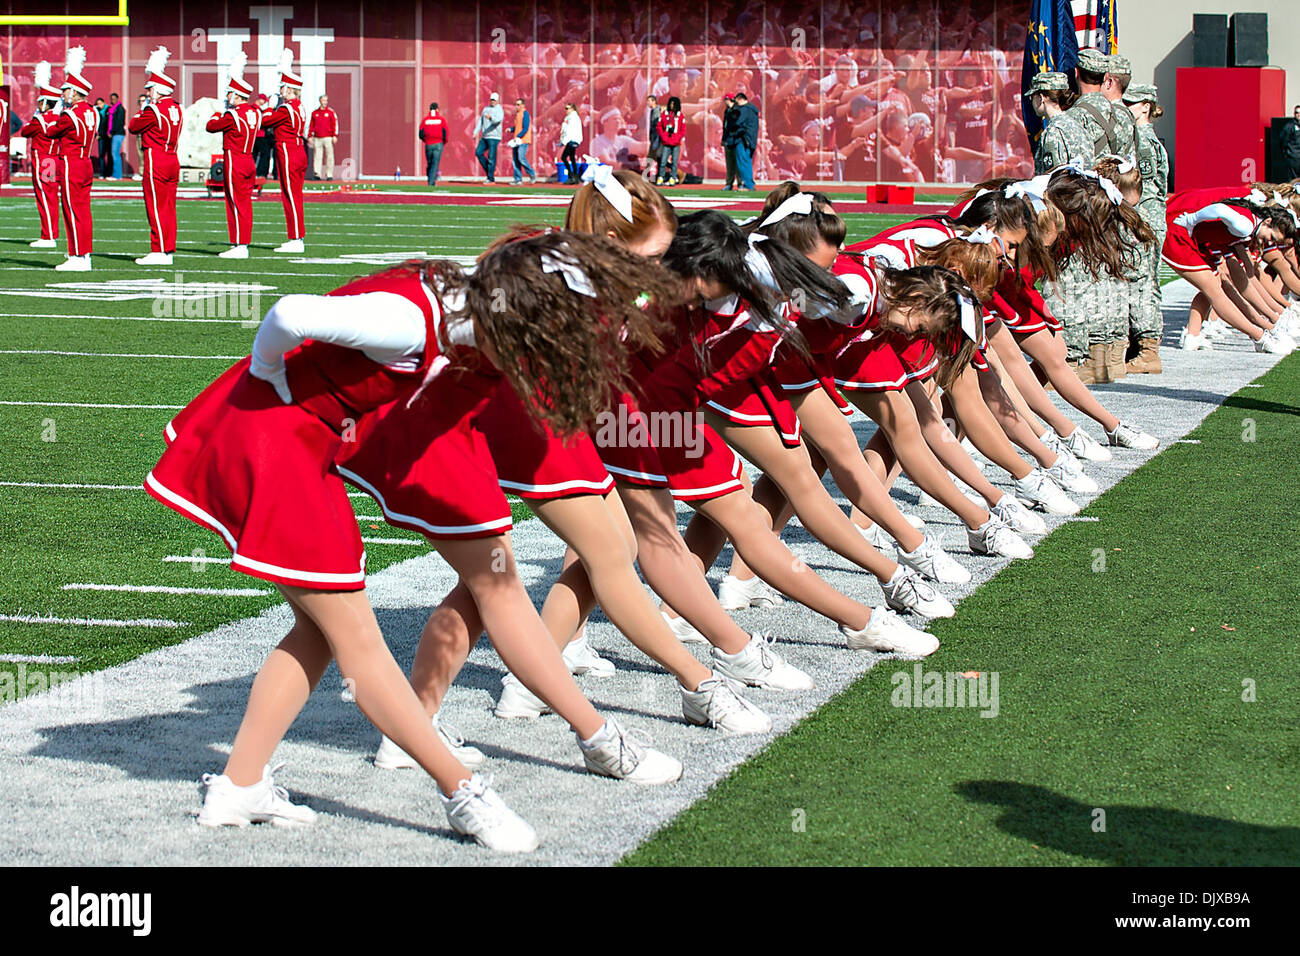 Oct. 30, 2010 - Bloomington, Indiana, United States of America - Indiana cheerleaders put on a show during pre-game activities. Northwestern defeated Indiana 20-17 in the game at Memorial Stadium in Bloomington, Indiana. (Credit Image: © Dan Cavallini/Southcreek Global/ZUMApress.com) Stock Photo